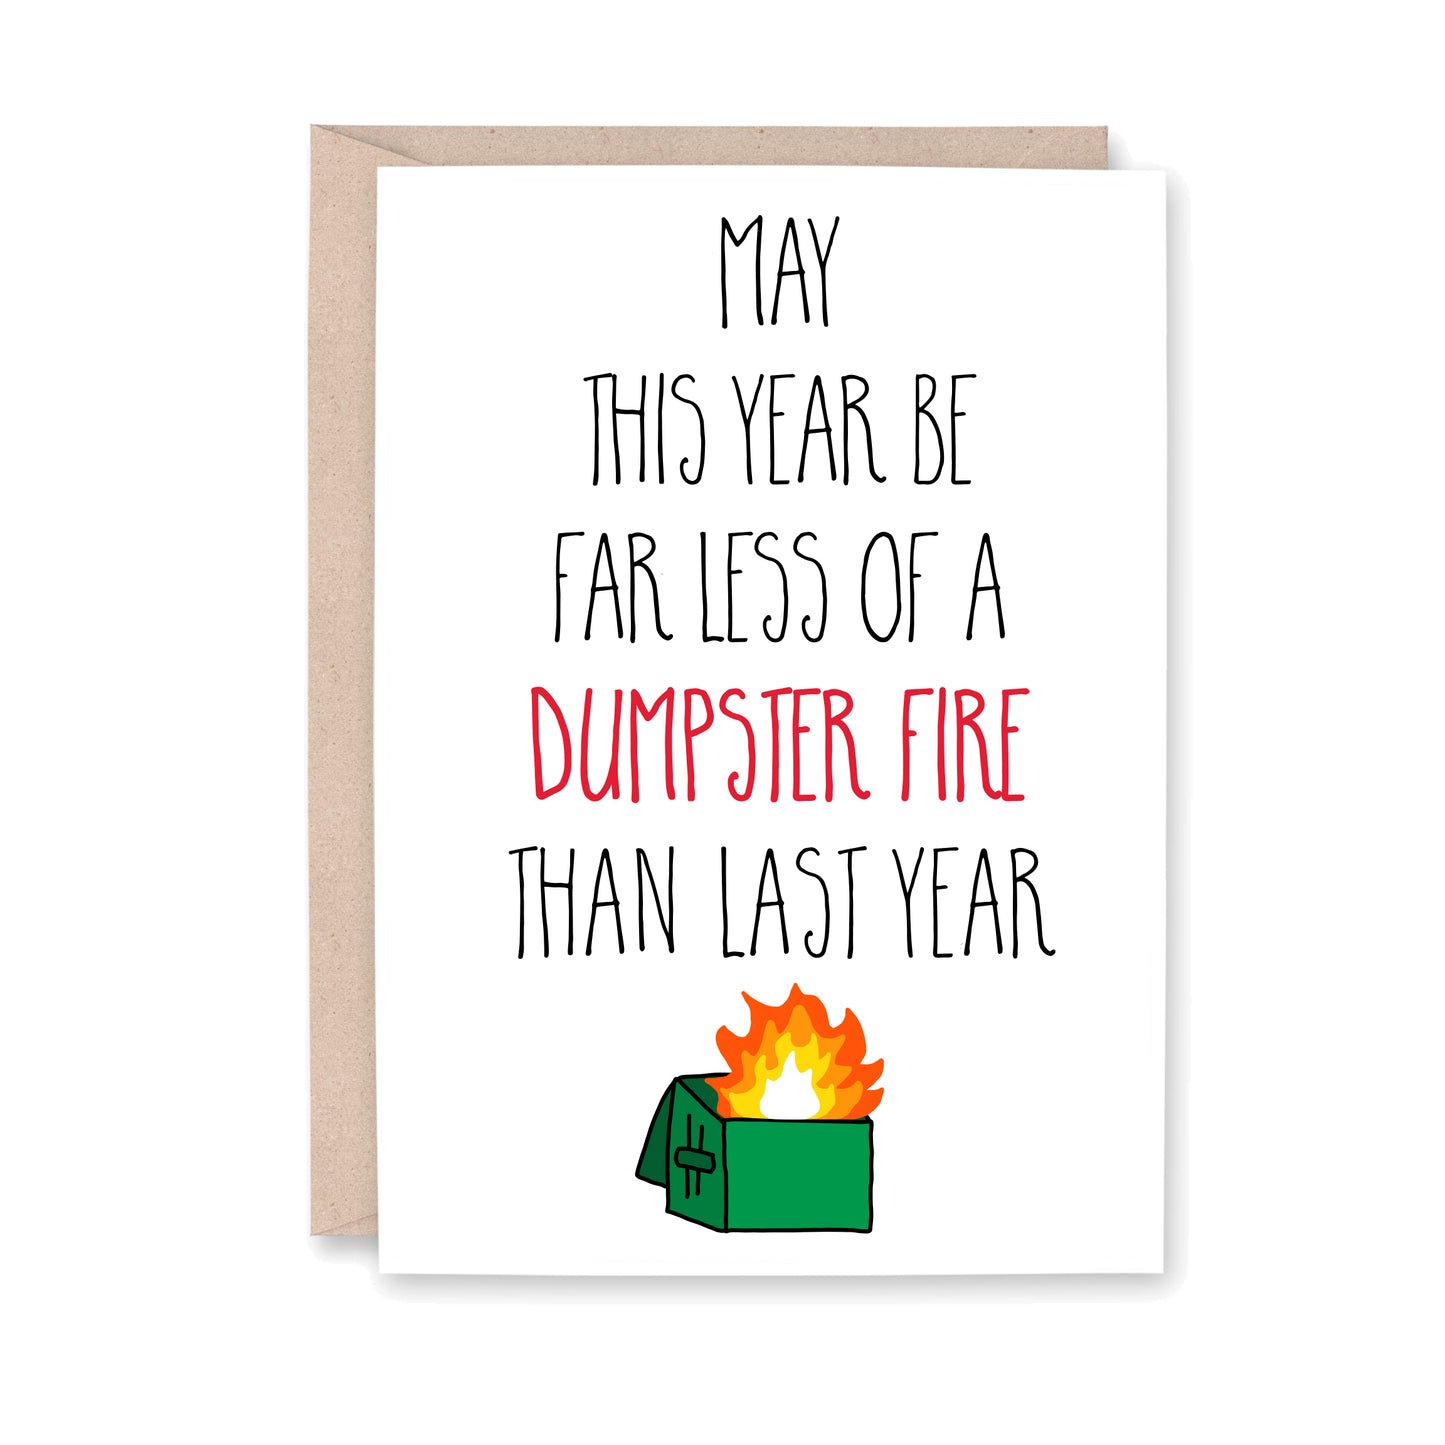 May this year be far less of a dumpster fire than last year